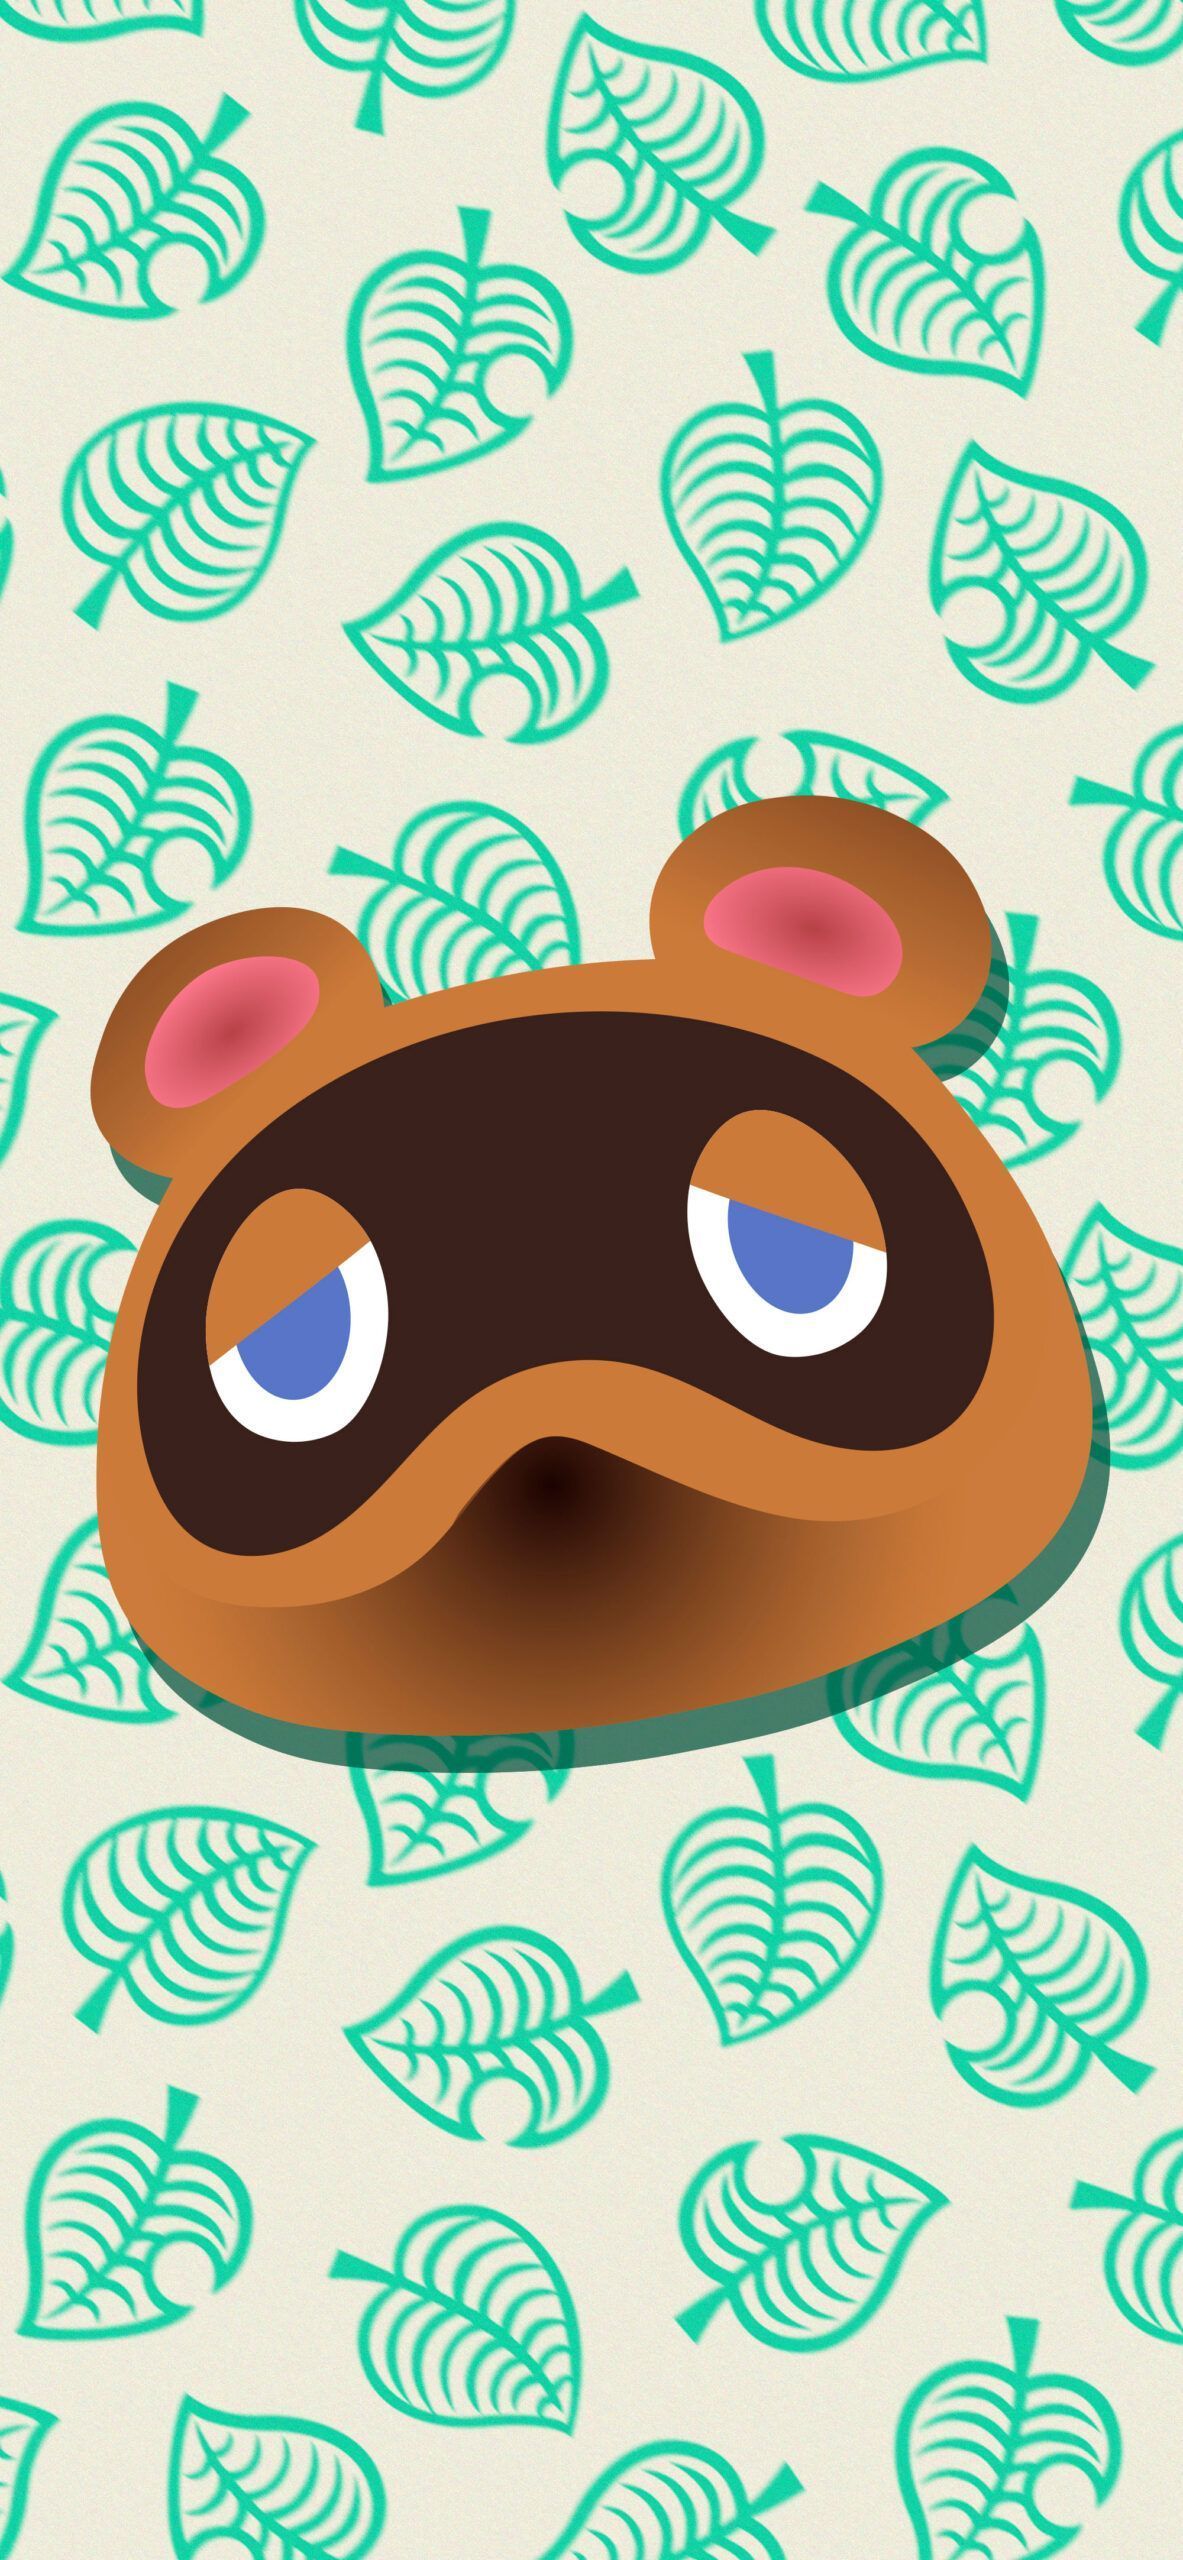 Tom Nook wallpaper for mobiles and tablets - Animal Crossing